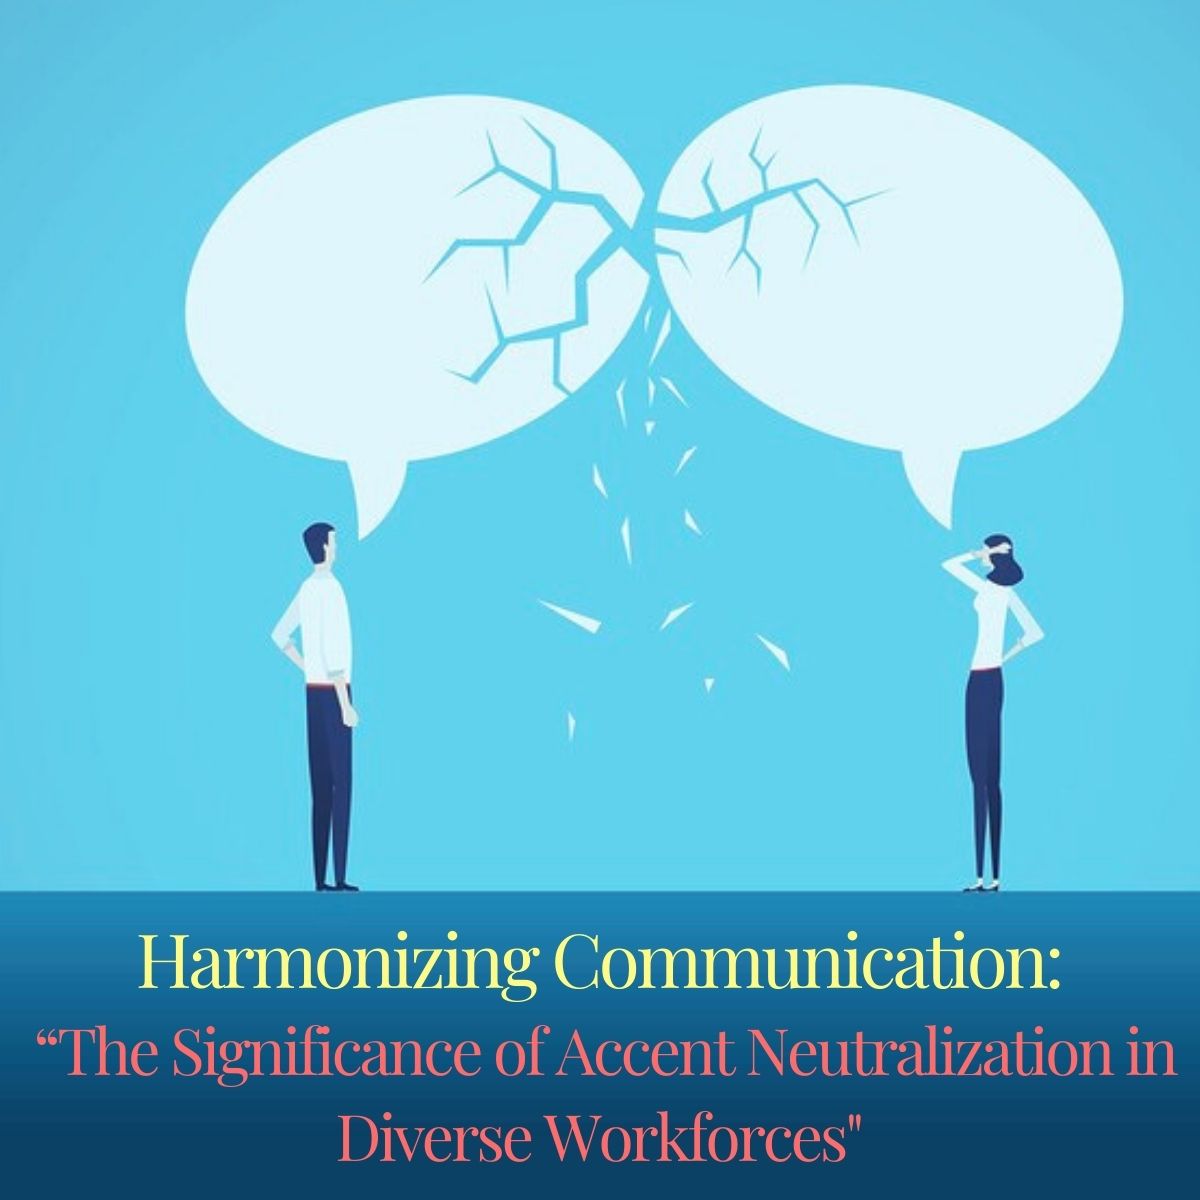 Harmonizing Communication: "The Significance of Accent Neutralization in Diverse Workforces"